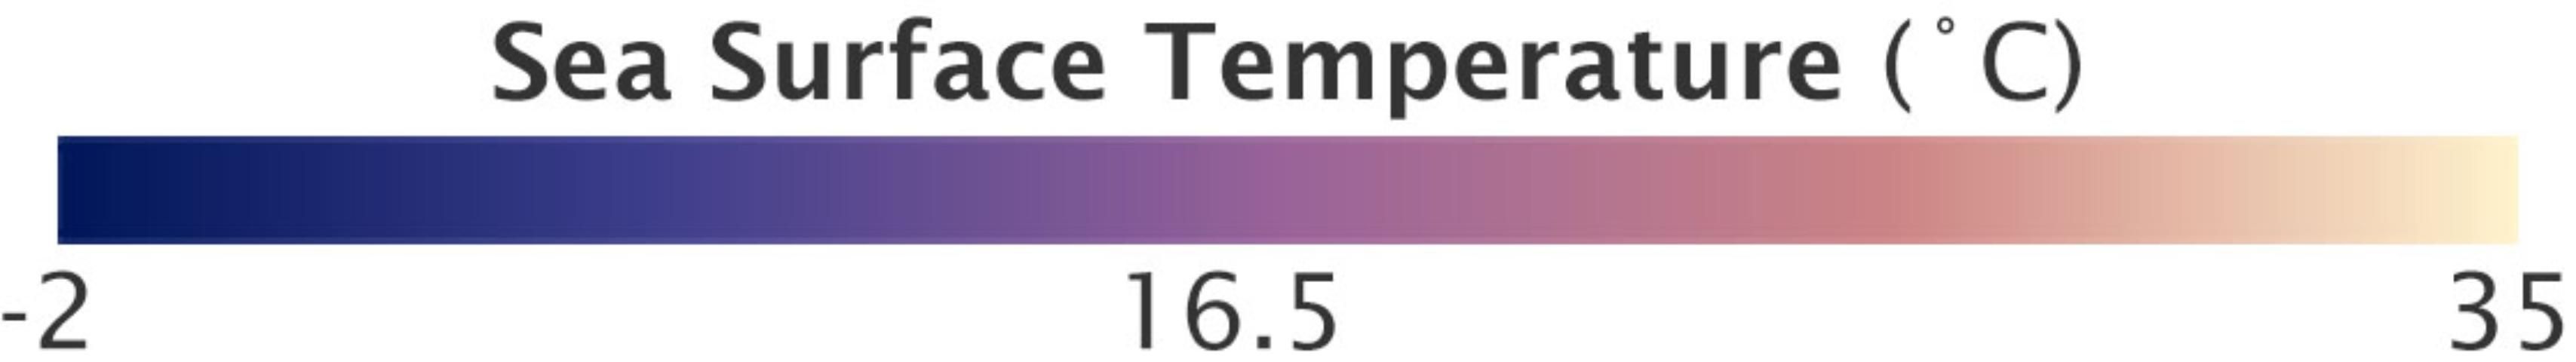 Figure 6. Image shows a continuous color scale with dark purple at left representing -2 degrees Celsius, changing at constant hue and saturation to the right, where pale yellow represents 35 degrees Celsius. The middle, 16.5 degrees, is shown in dark pink.